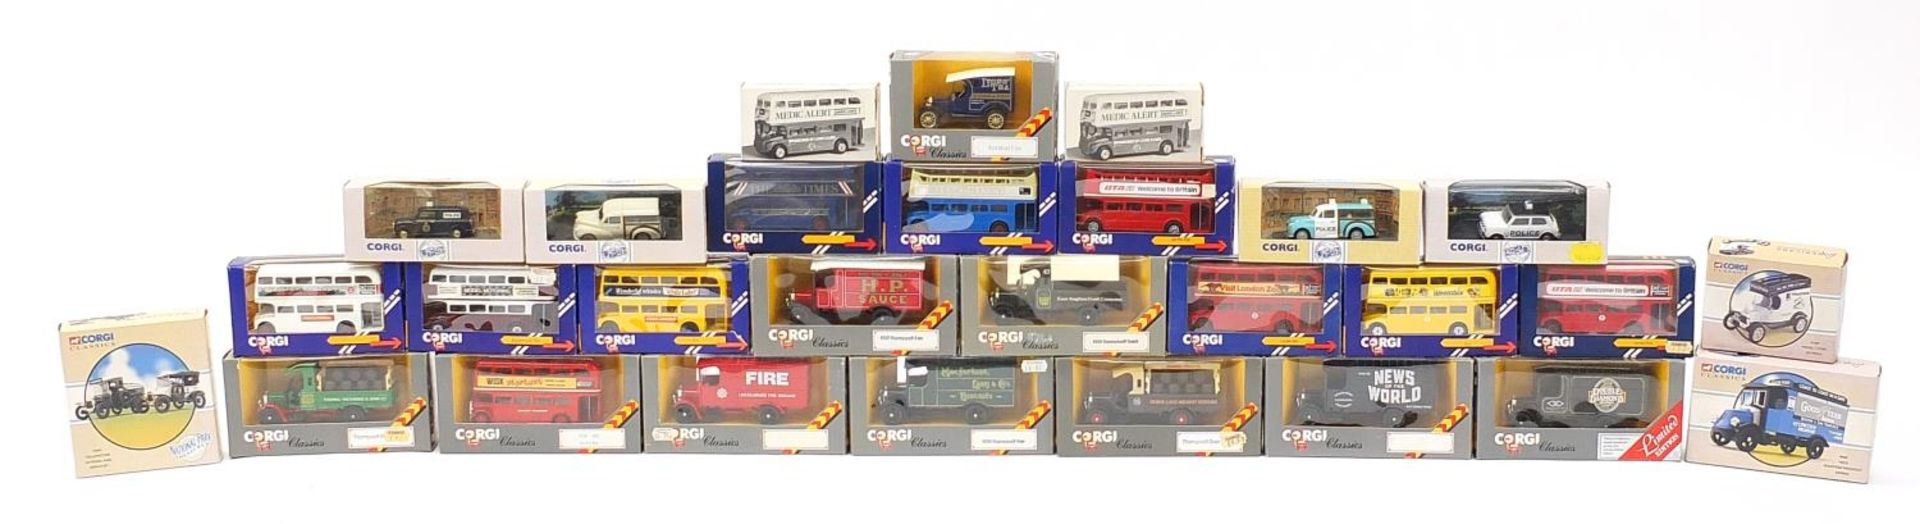 Collection of Corgi die cast model vehicles with boxes, including four model T vans :For Further